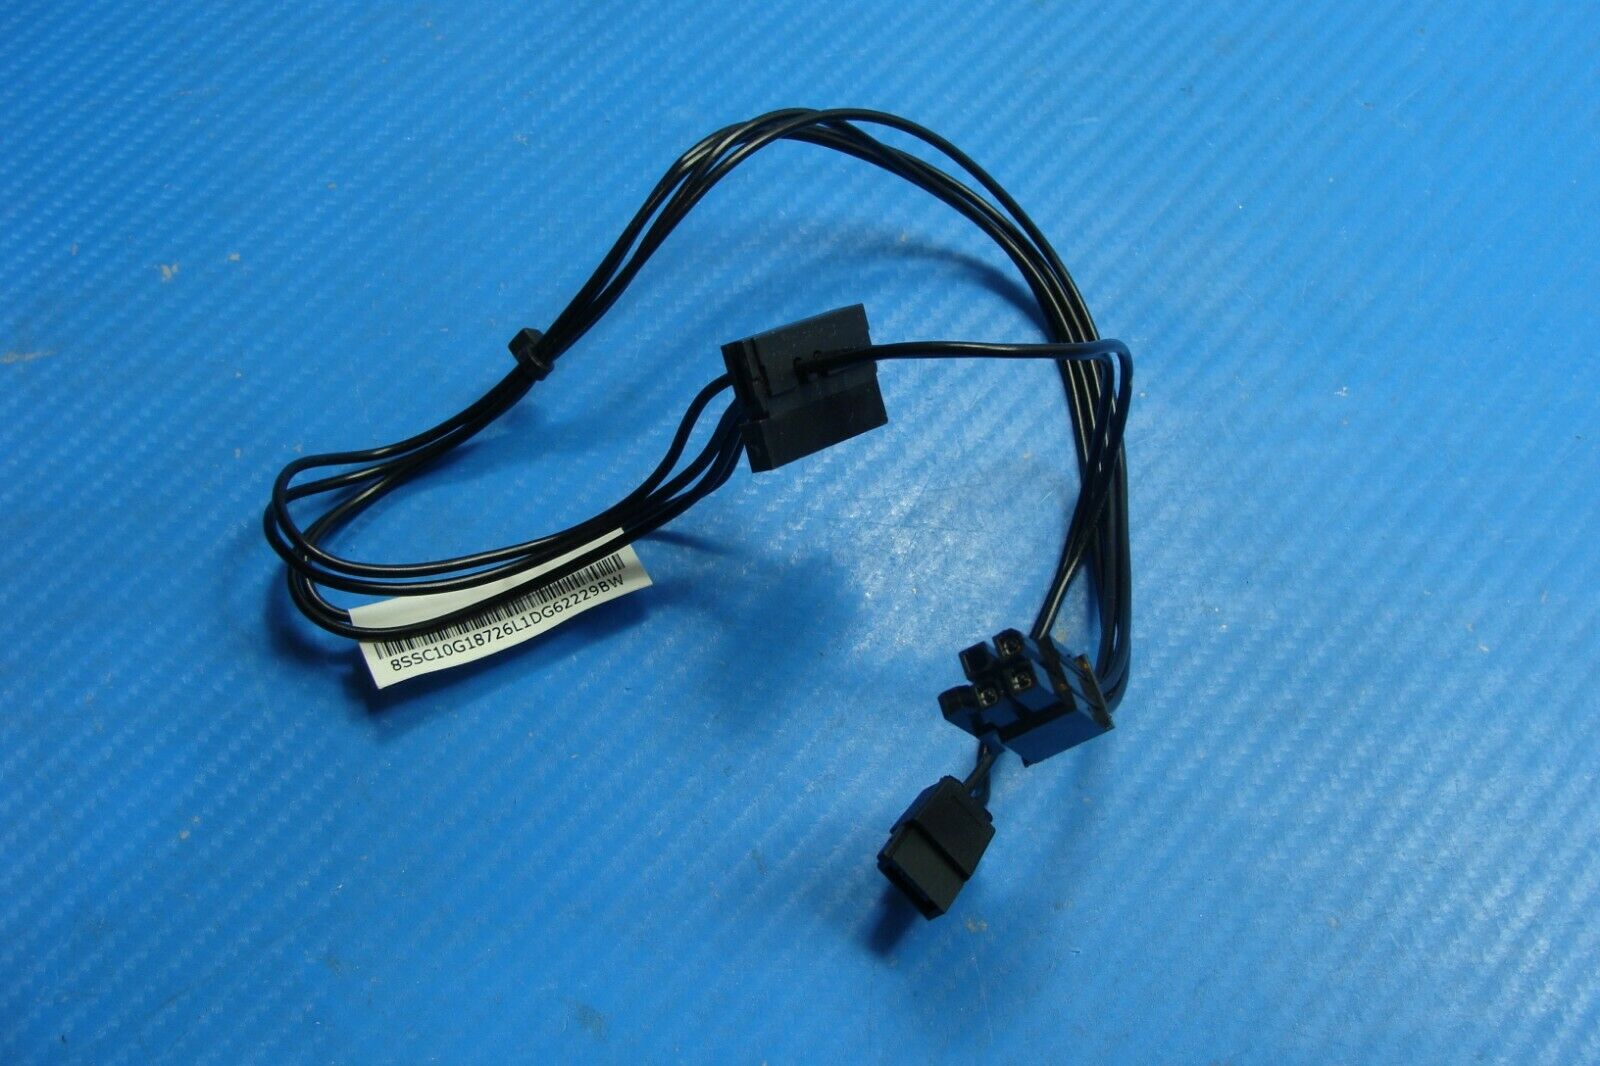 Lenovo Thinkcentre M800 Genuine Desktop Odd Hdd Power Coonector Cable 04X2741 - Laptop Parts - Buy Authentic Computer Parts - Top Seller Ebay